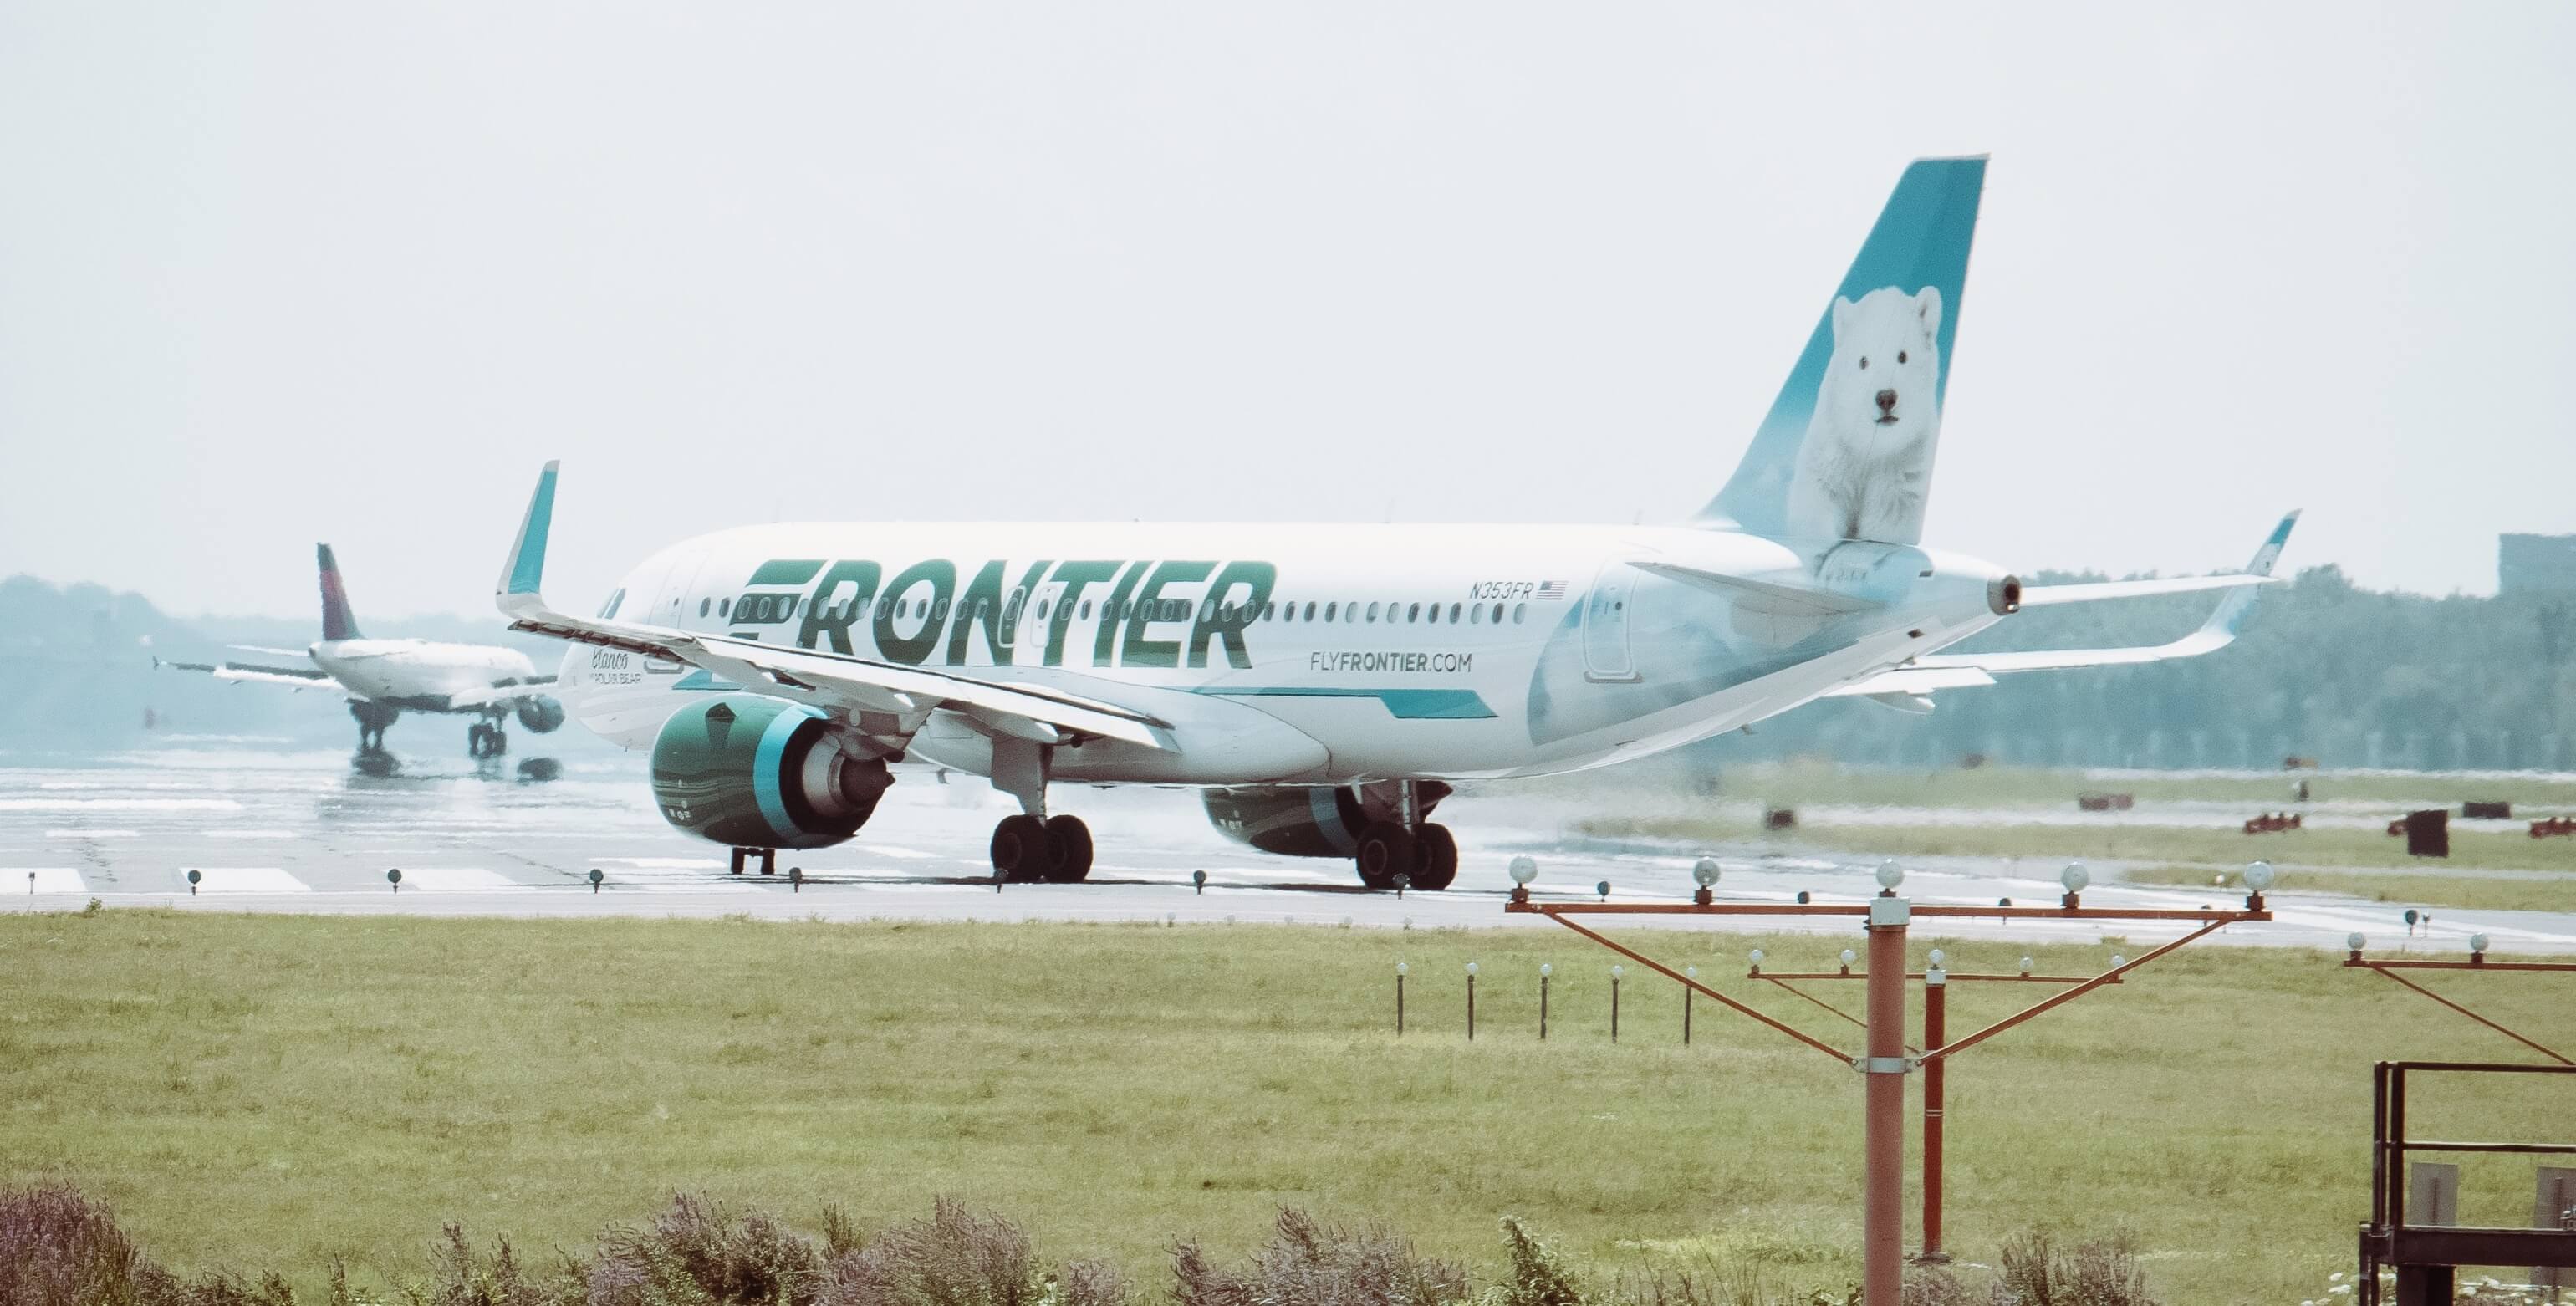 80 off flights from Frontier Airlines with Promo Code